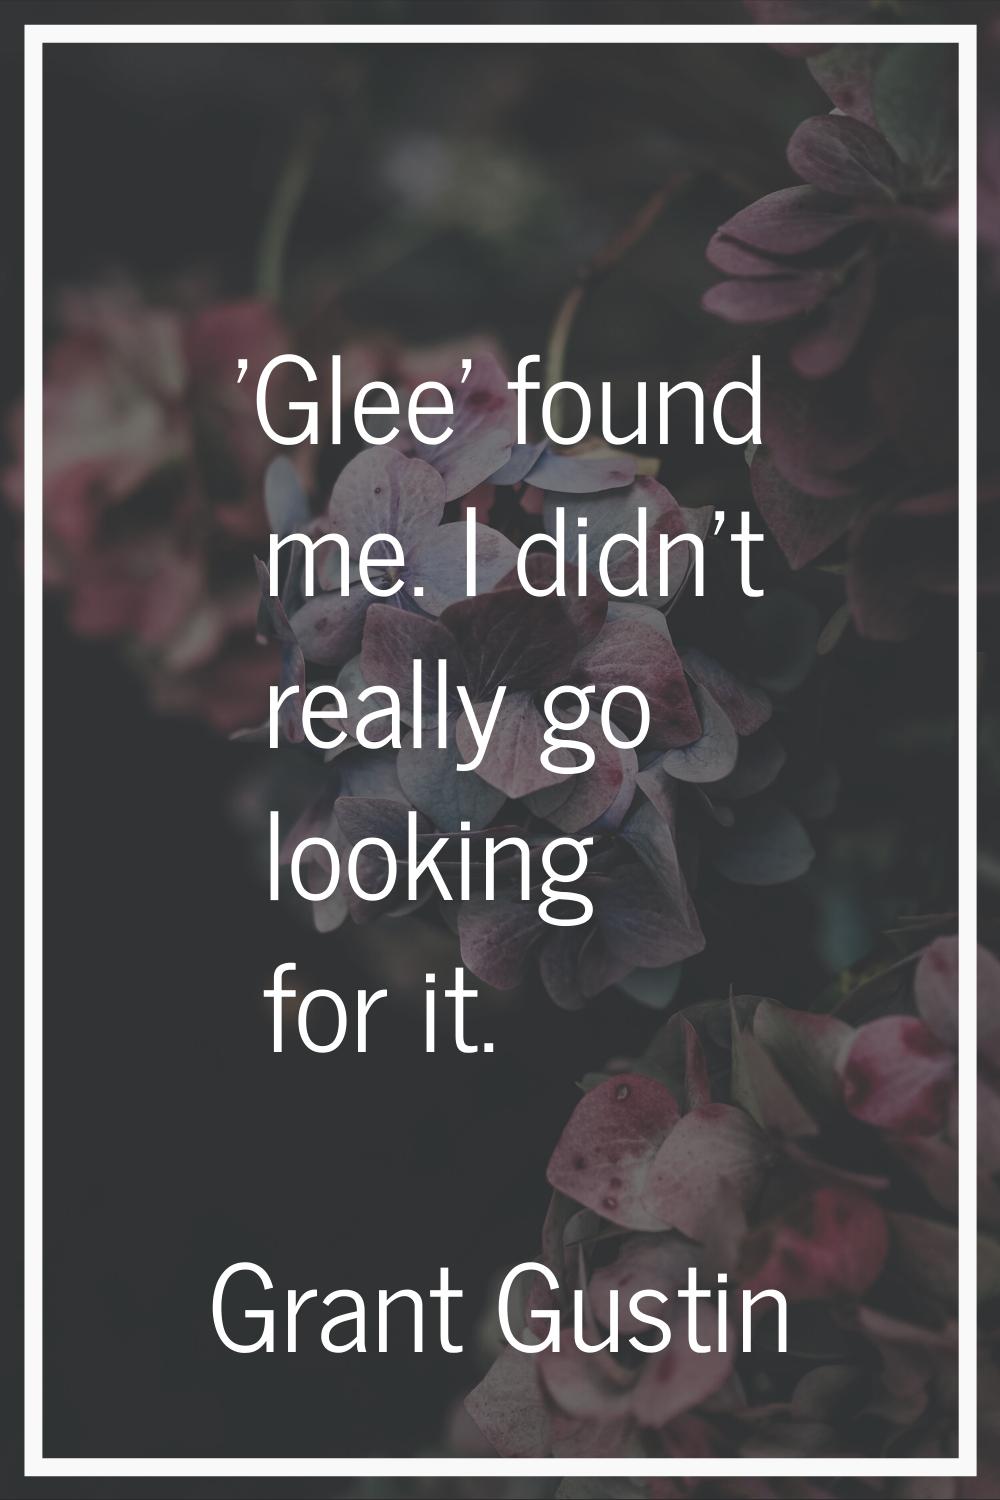 'Glee' found me. I didn't really go looking for it.